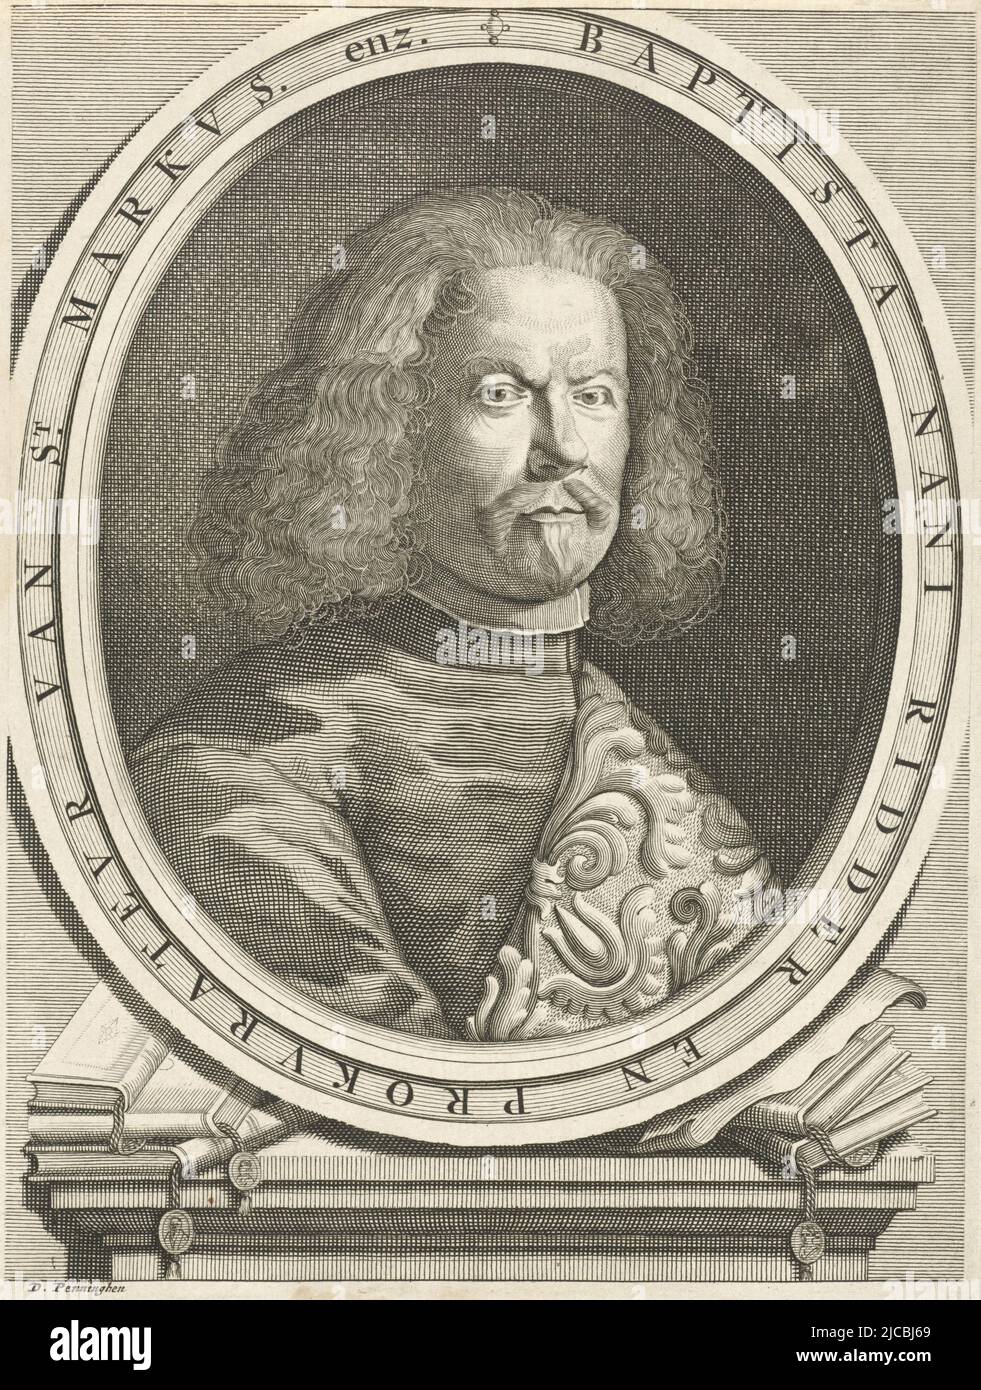 Portrait of the Venetian writer Baptista Nani The frame of his portrait rests on a pied-a-terre on which are various books, Portrait of Baptista Nani, print maker: Daniël met de Penningen, (mentioned on object), Amsterdam, 1685 - 1696, paper, engraving, h 195 mm × w 147 mm Stock Photo